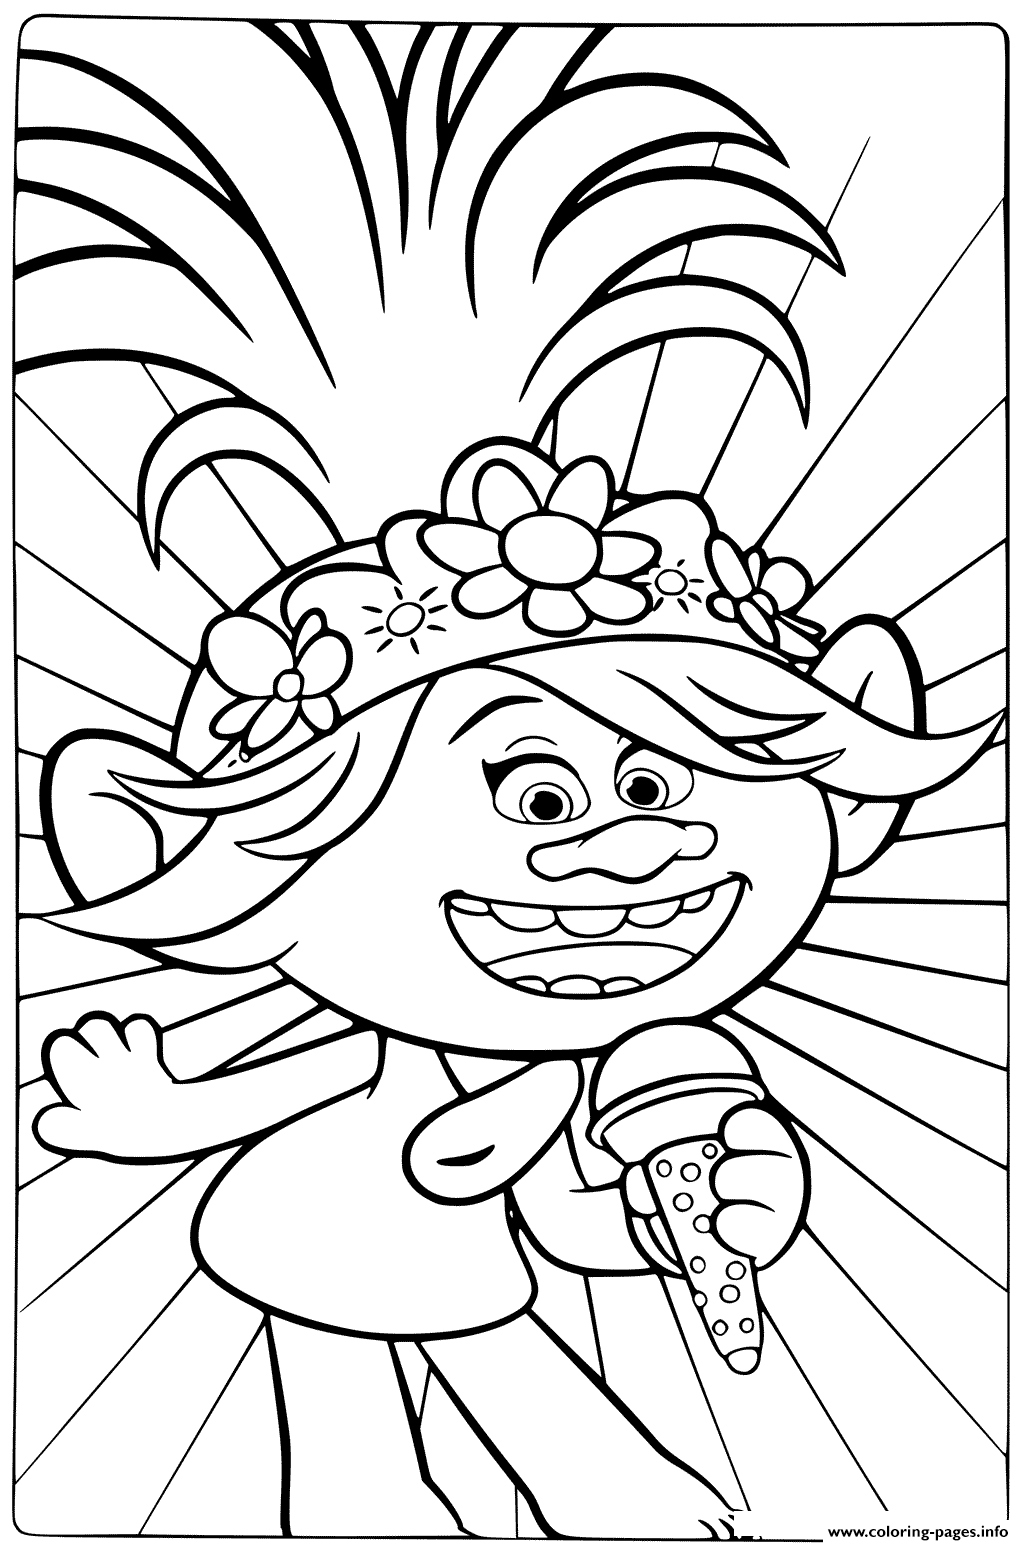 Princess Poppy Coloring Pages - Coloring Home